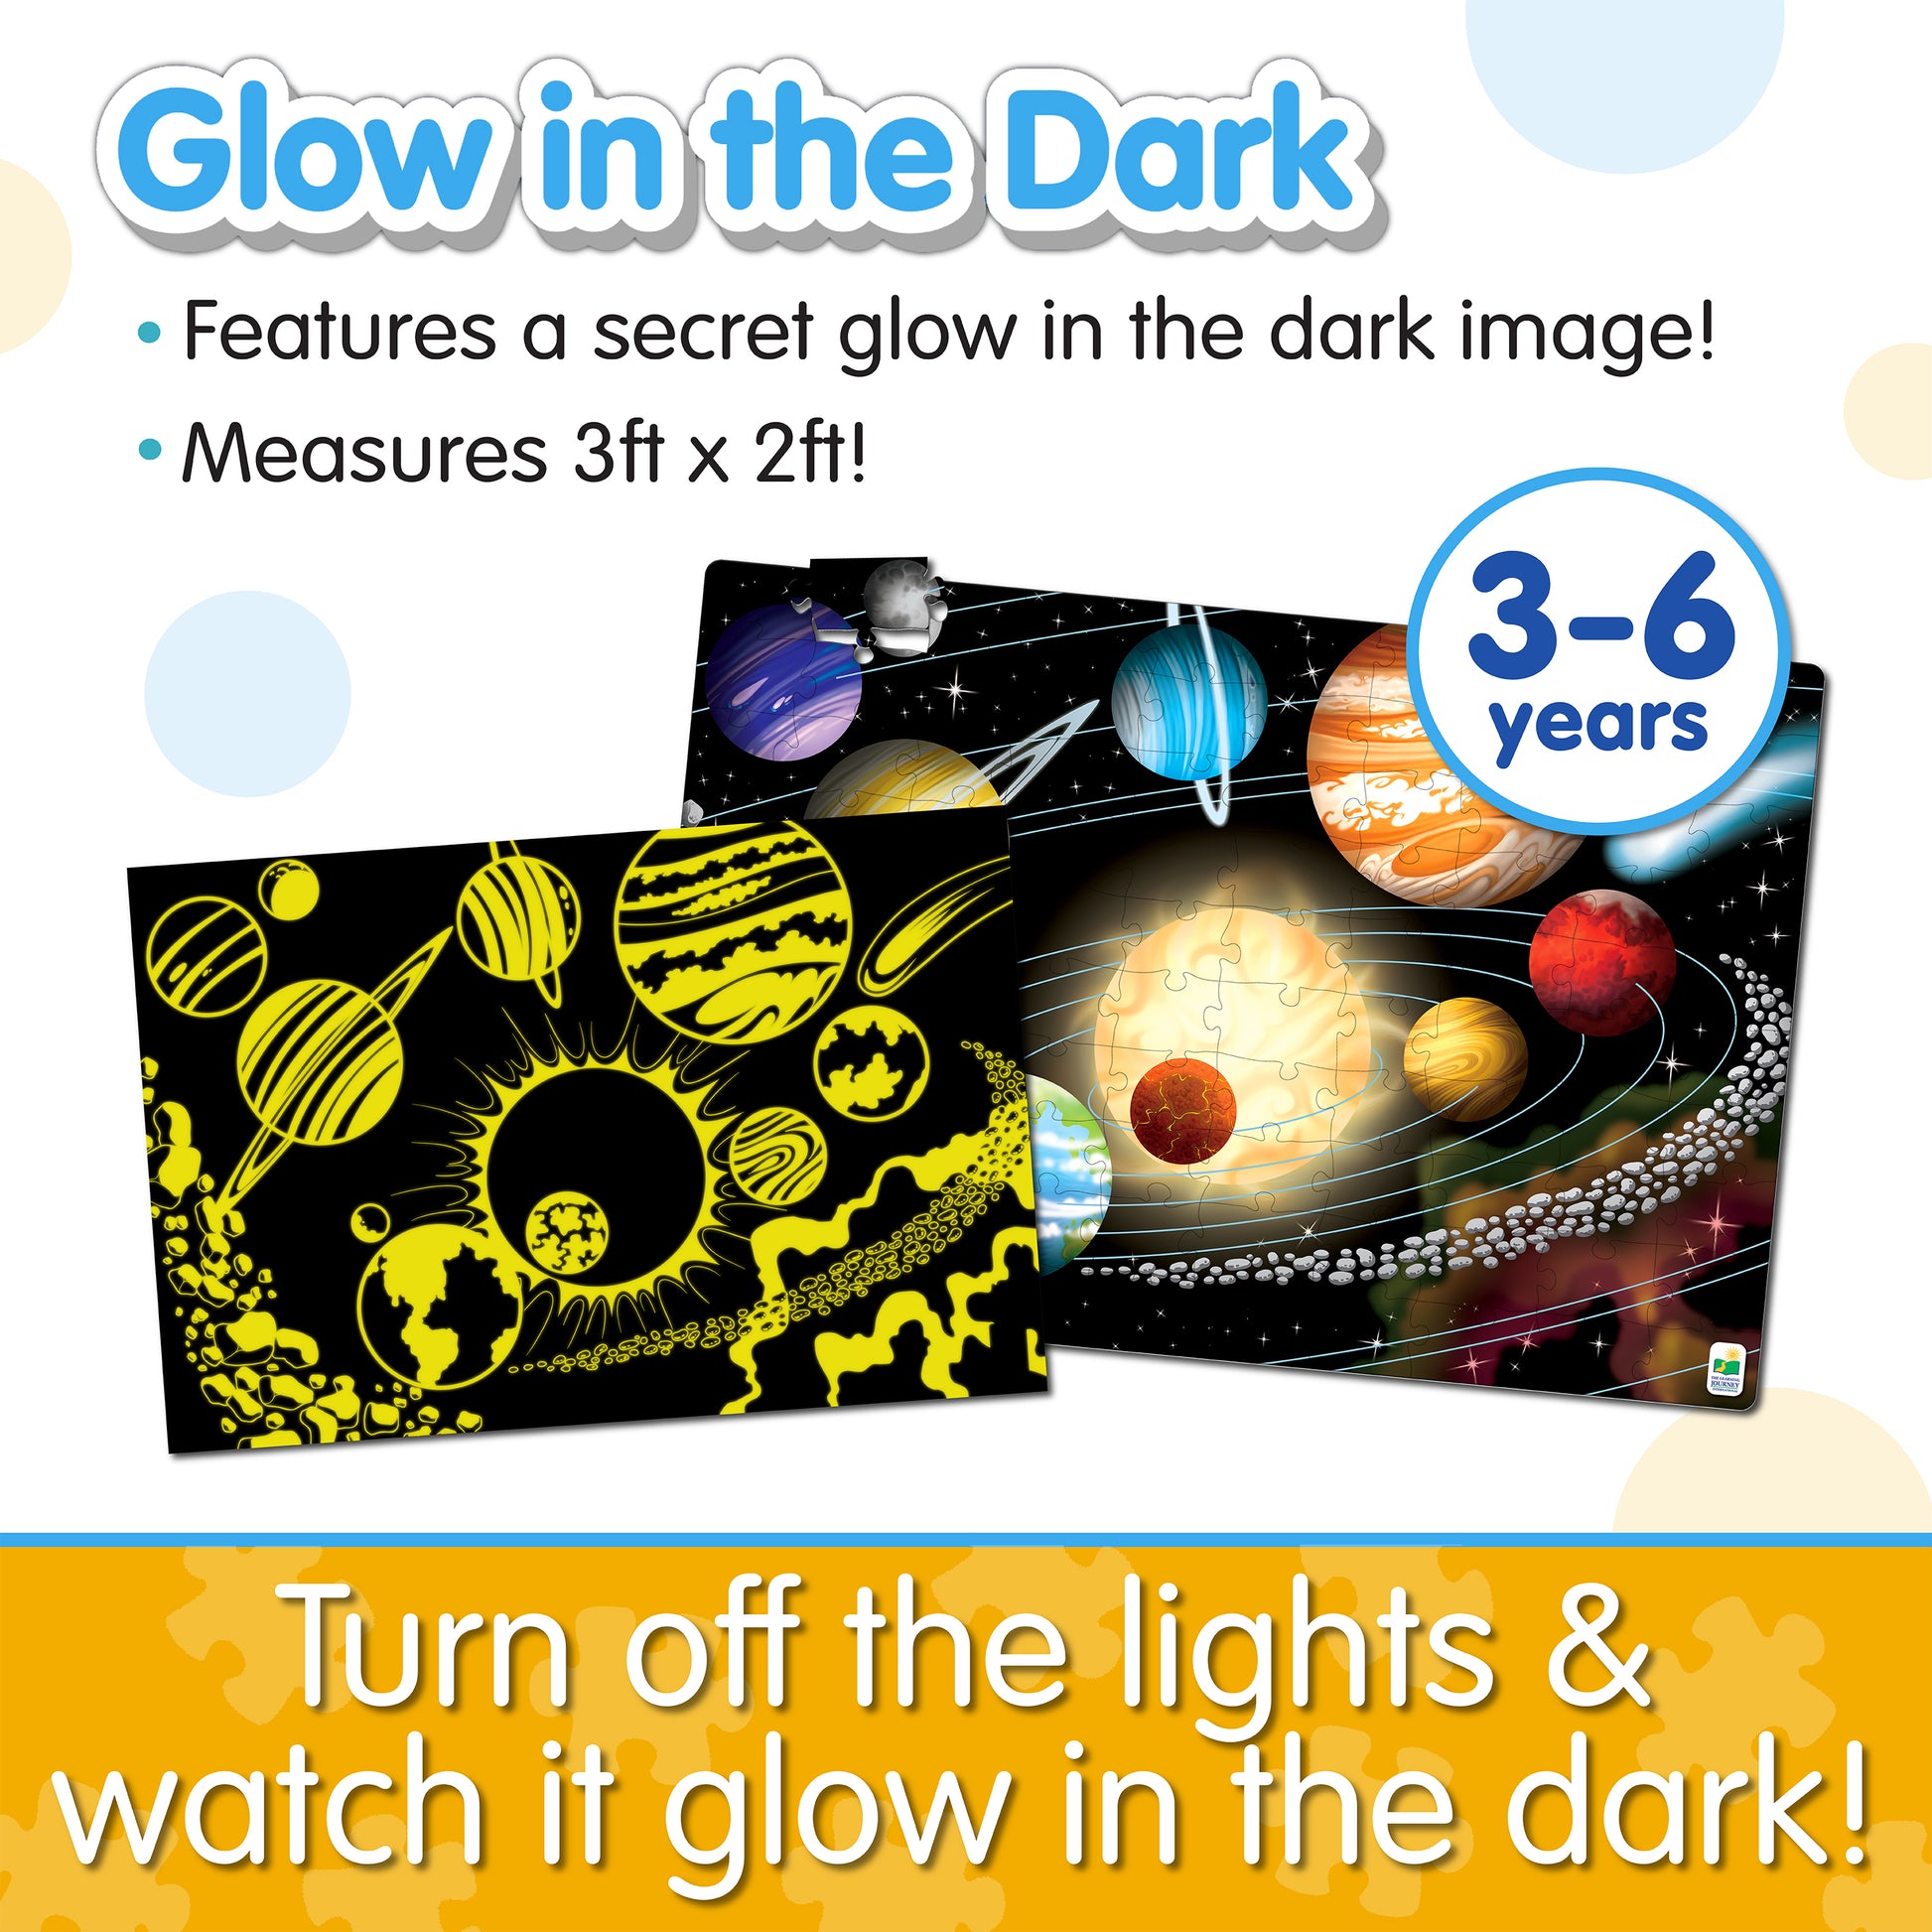 Infographic about Glow in the Dark - Space that says, "Turn off the lights and watch it glow in the dark!"